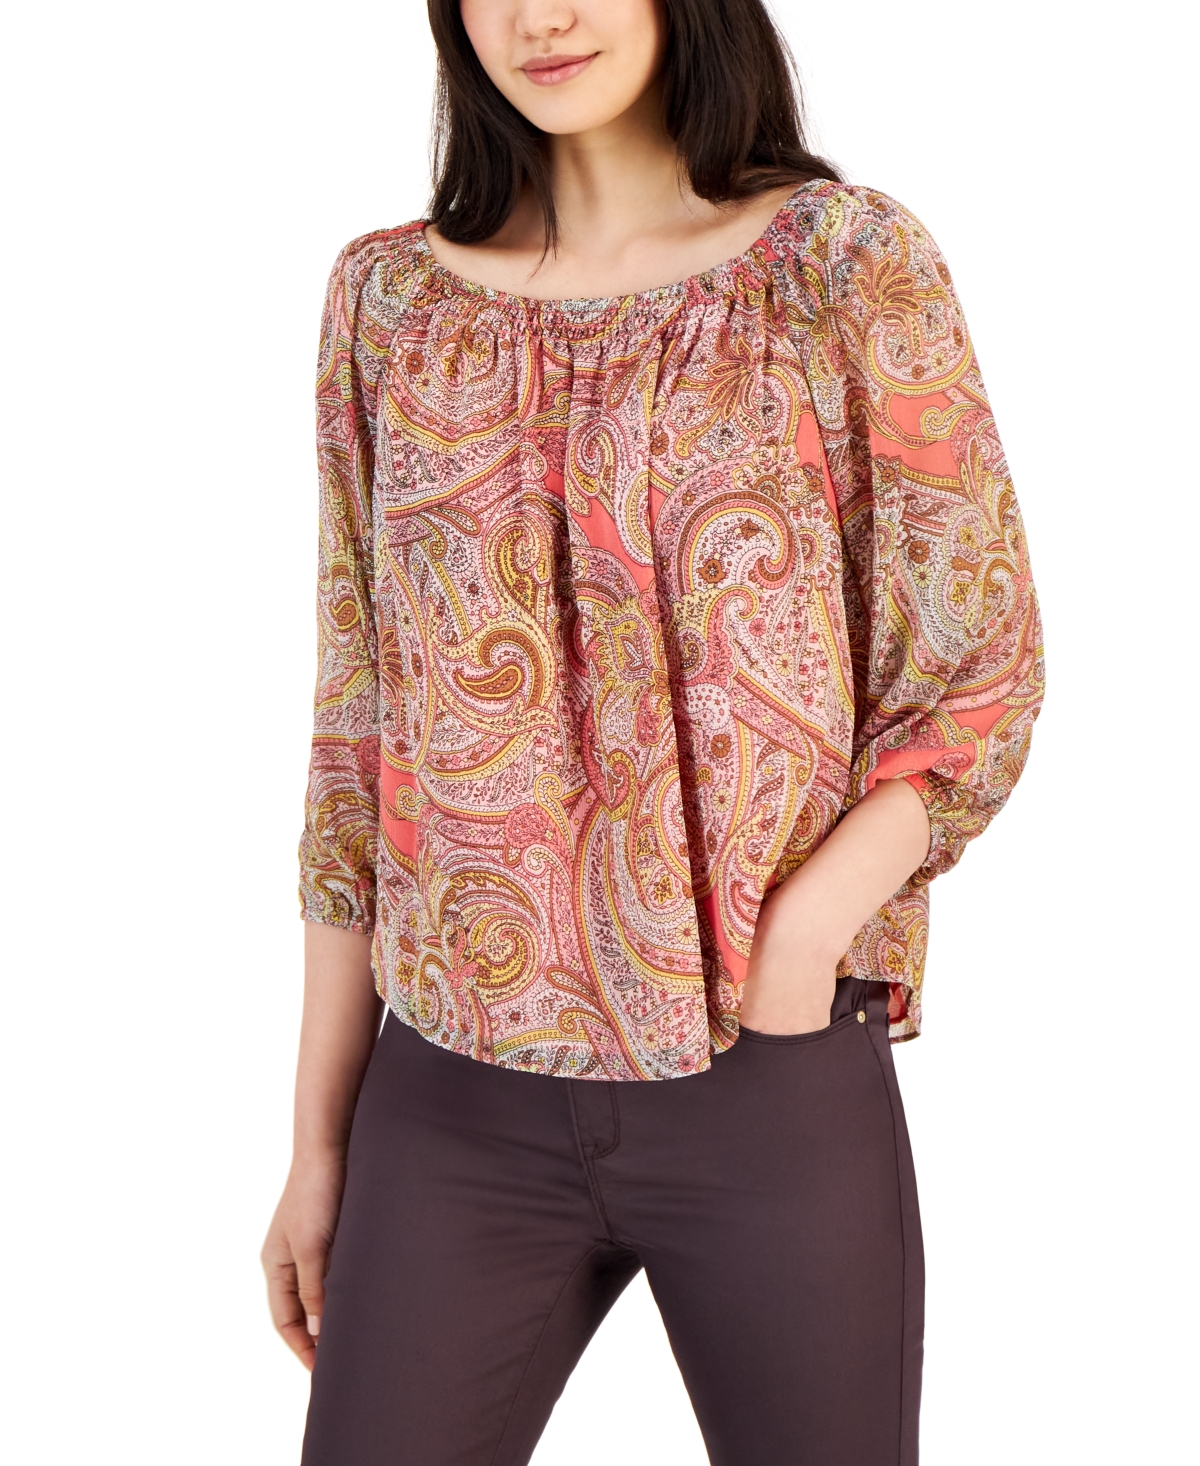 Tommy Hilfiger Women's Paisley-Print 3/4-Sleeve Top